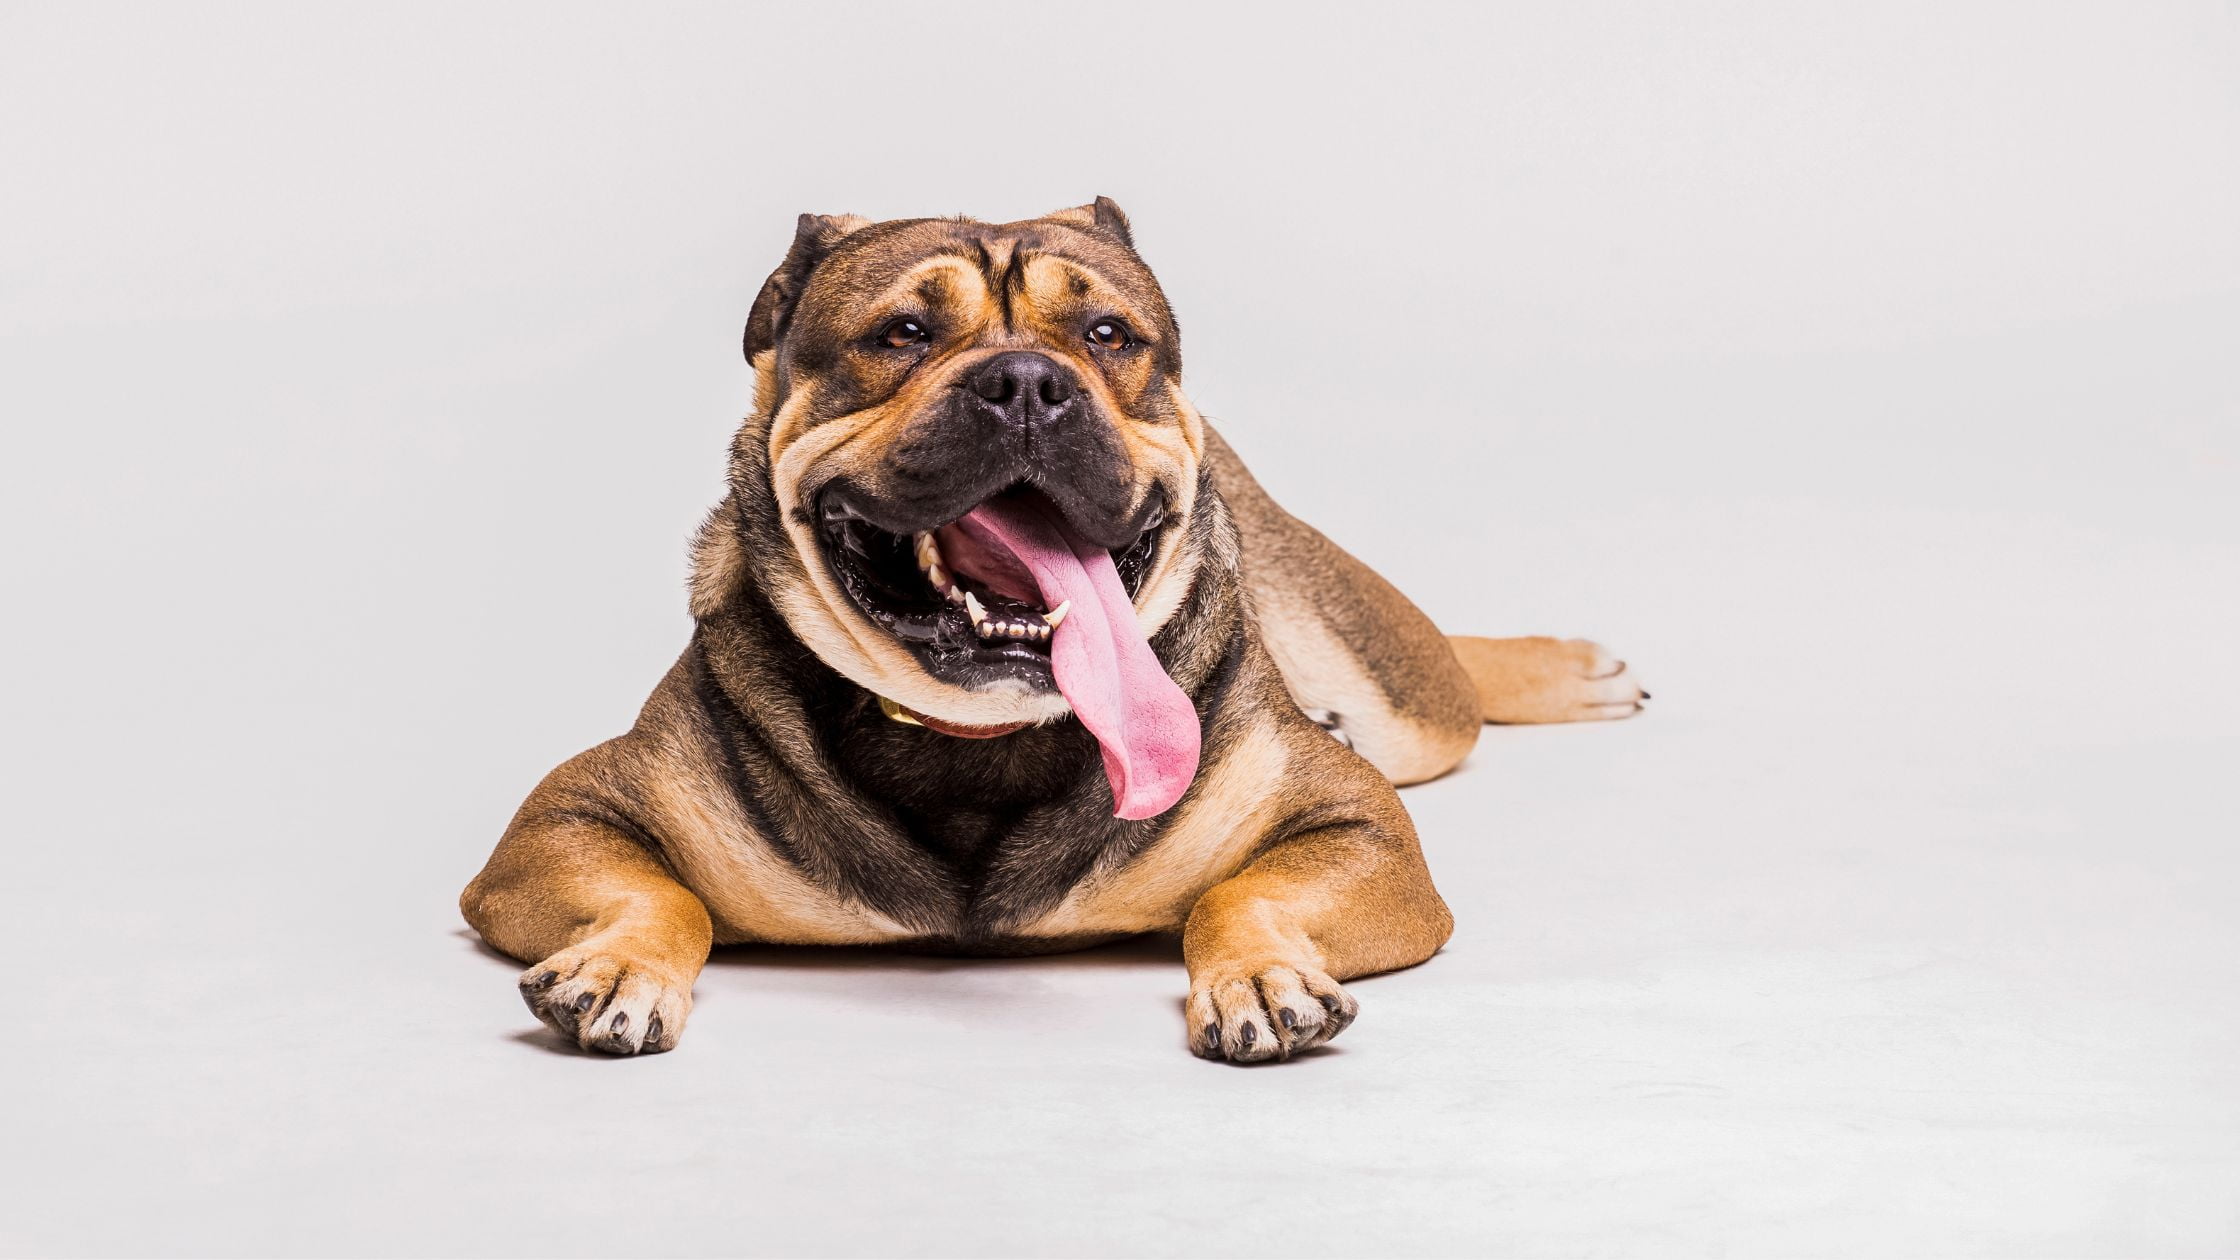 HEALTHIEST DOG BREEDS AND CHOOSING DOG'S NAME